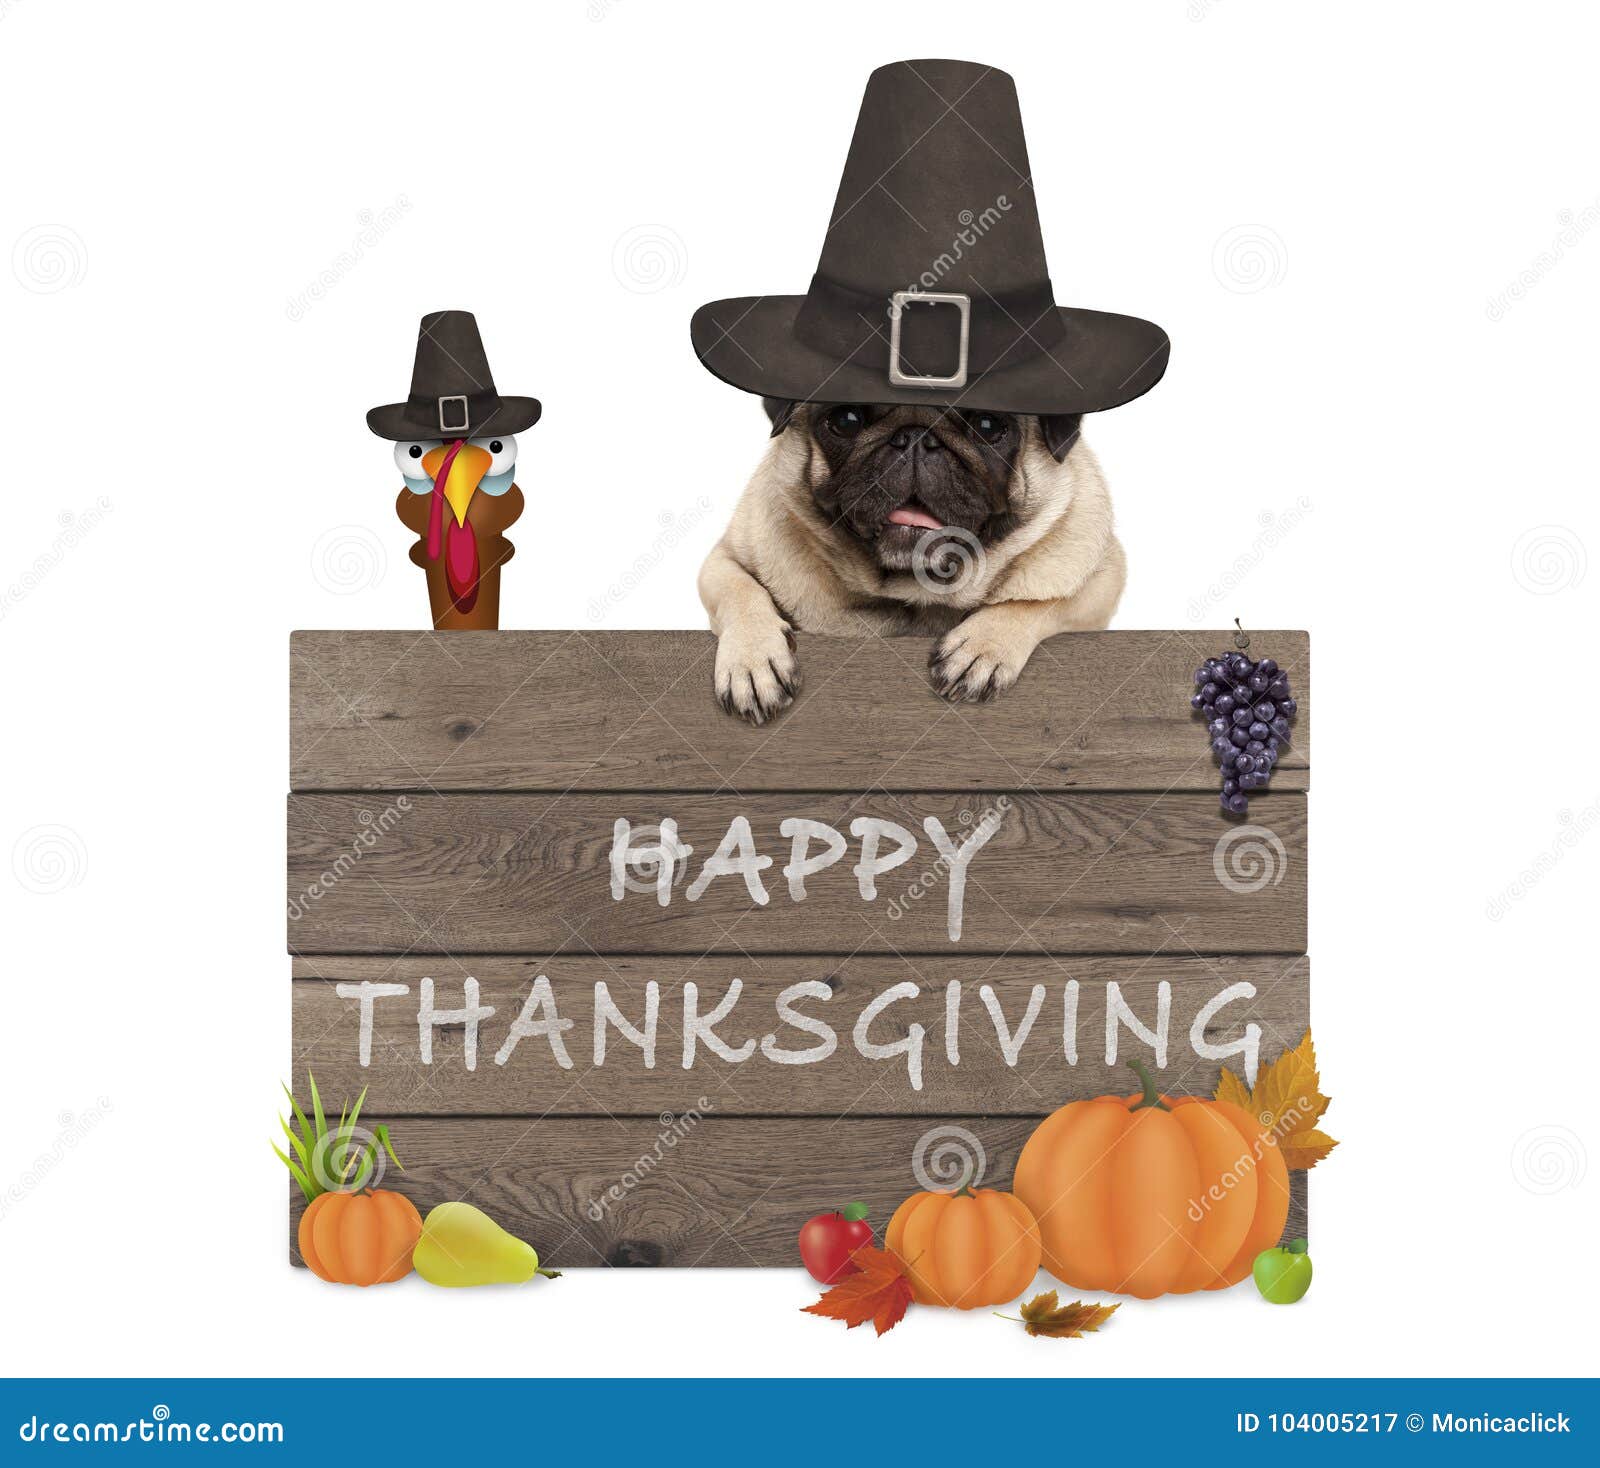 funny turkey and pug dog wearing pilgrim hat for thanksgiving day and wooden sign with text happy thanksgiving